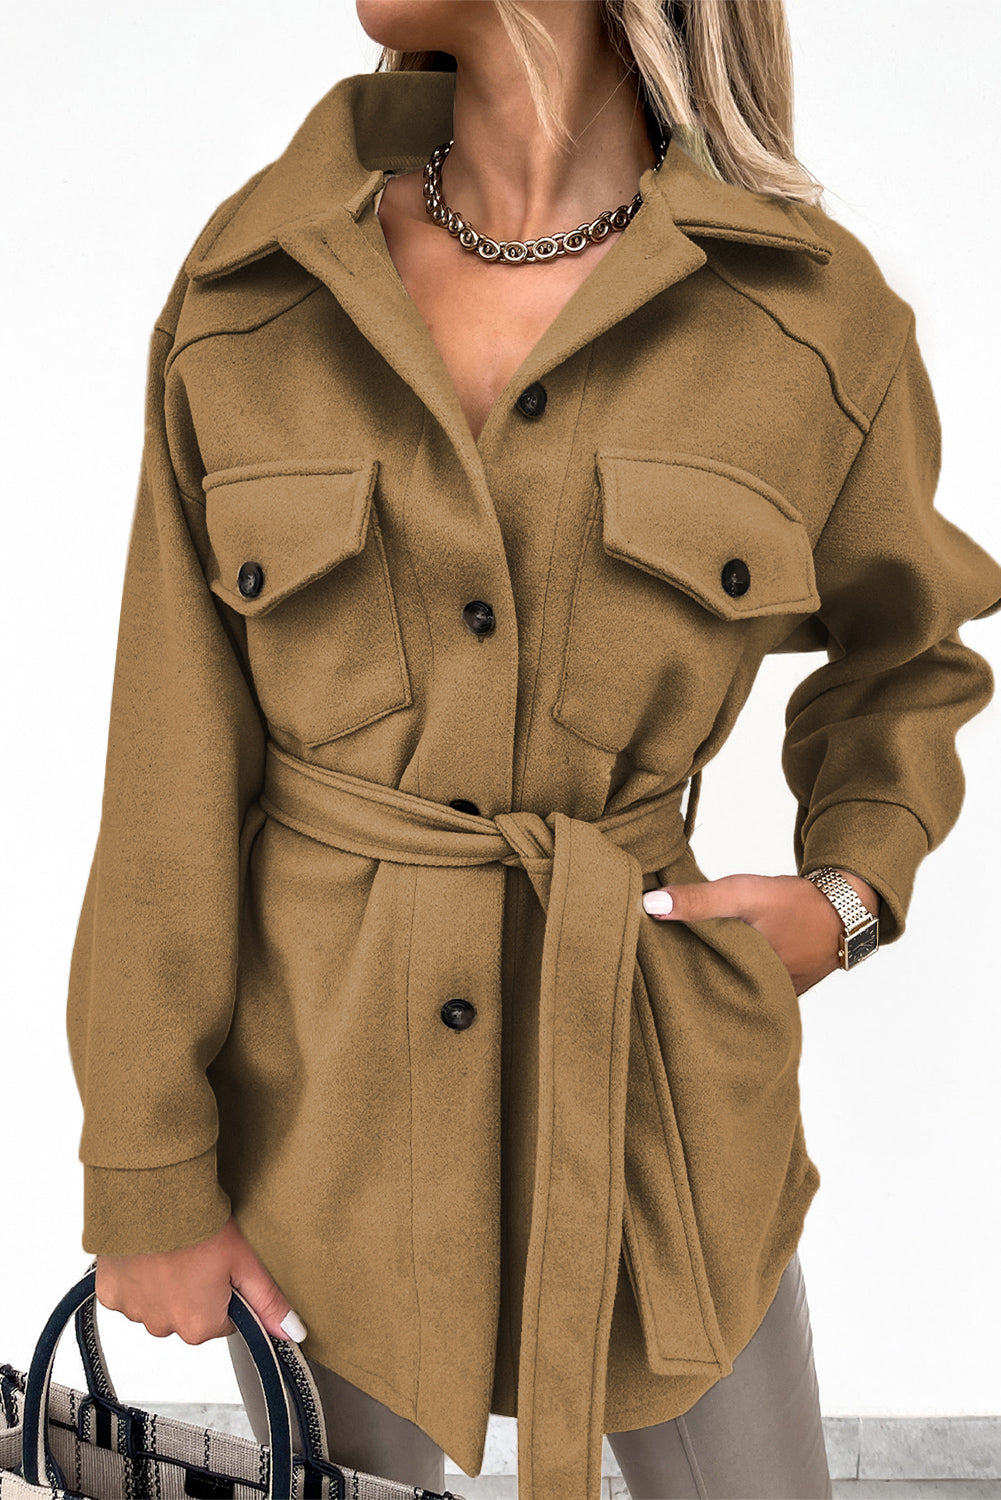 Khaki Women's Lapel Button Down Coat Winter Belted Coat with Pockets LC8511359-1016